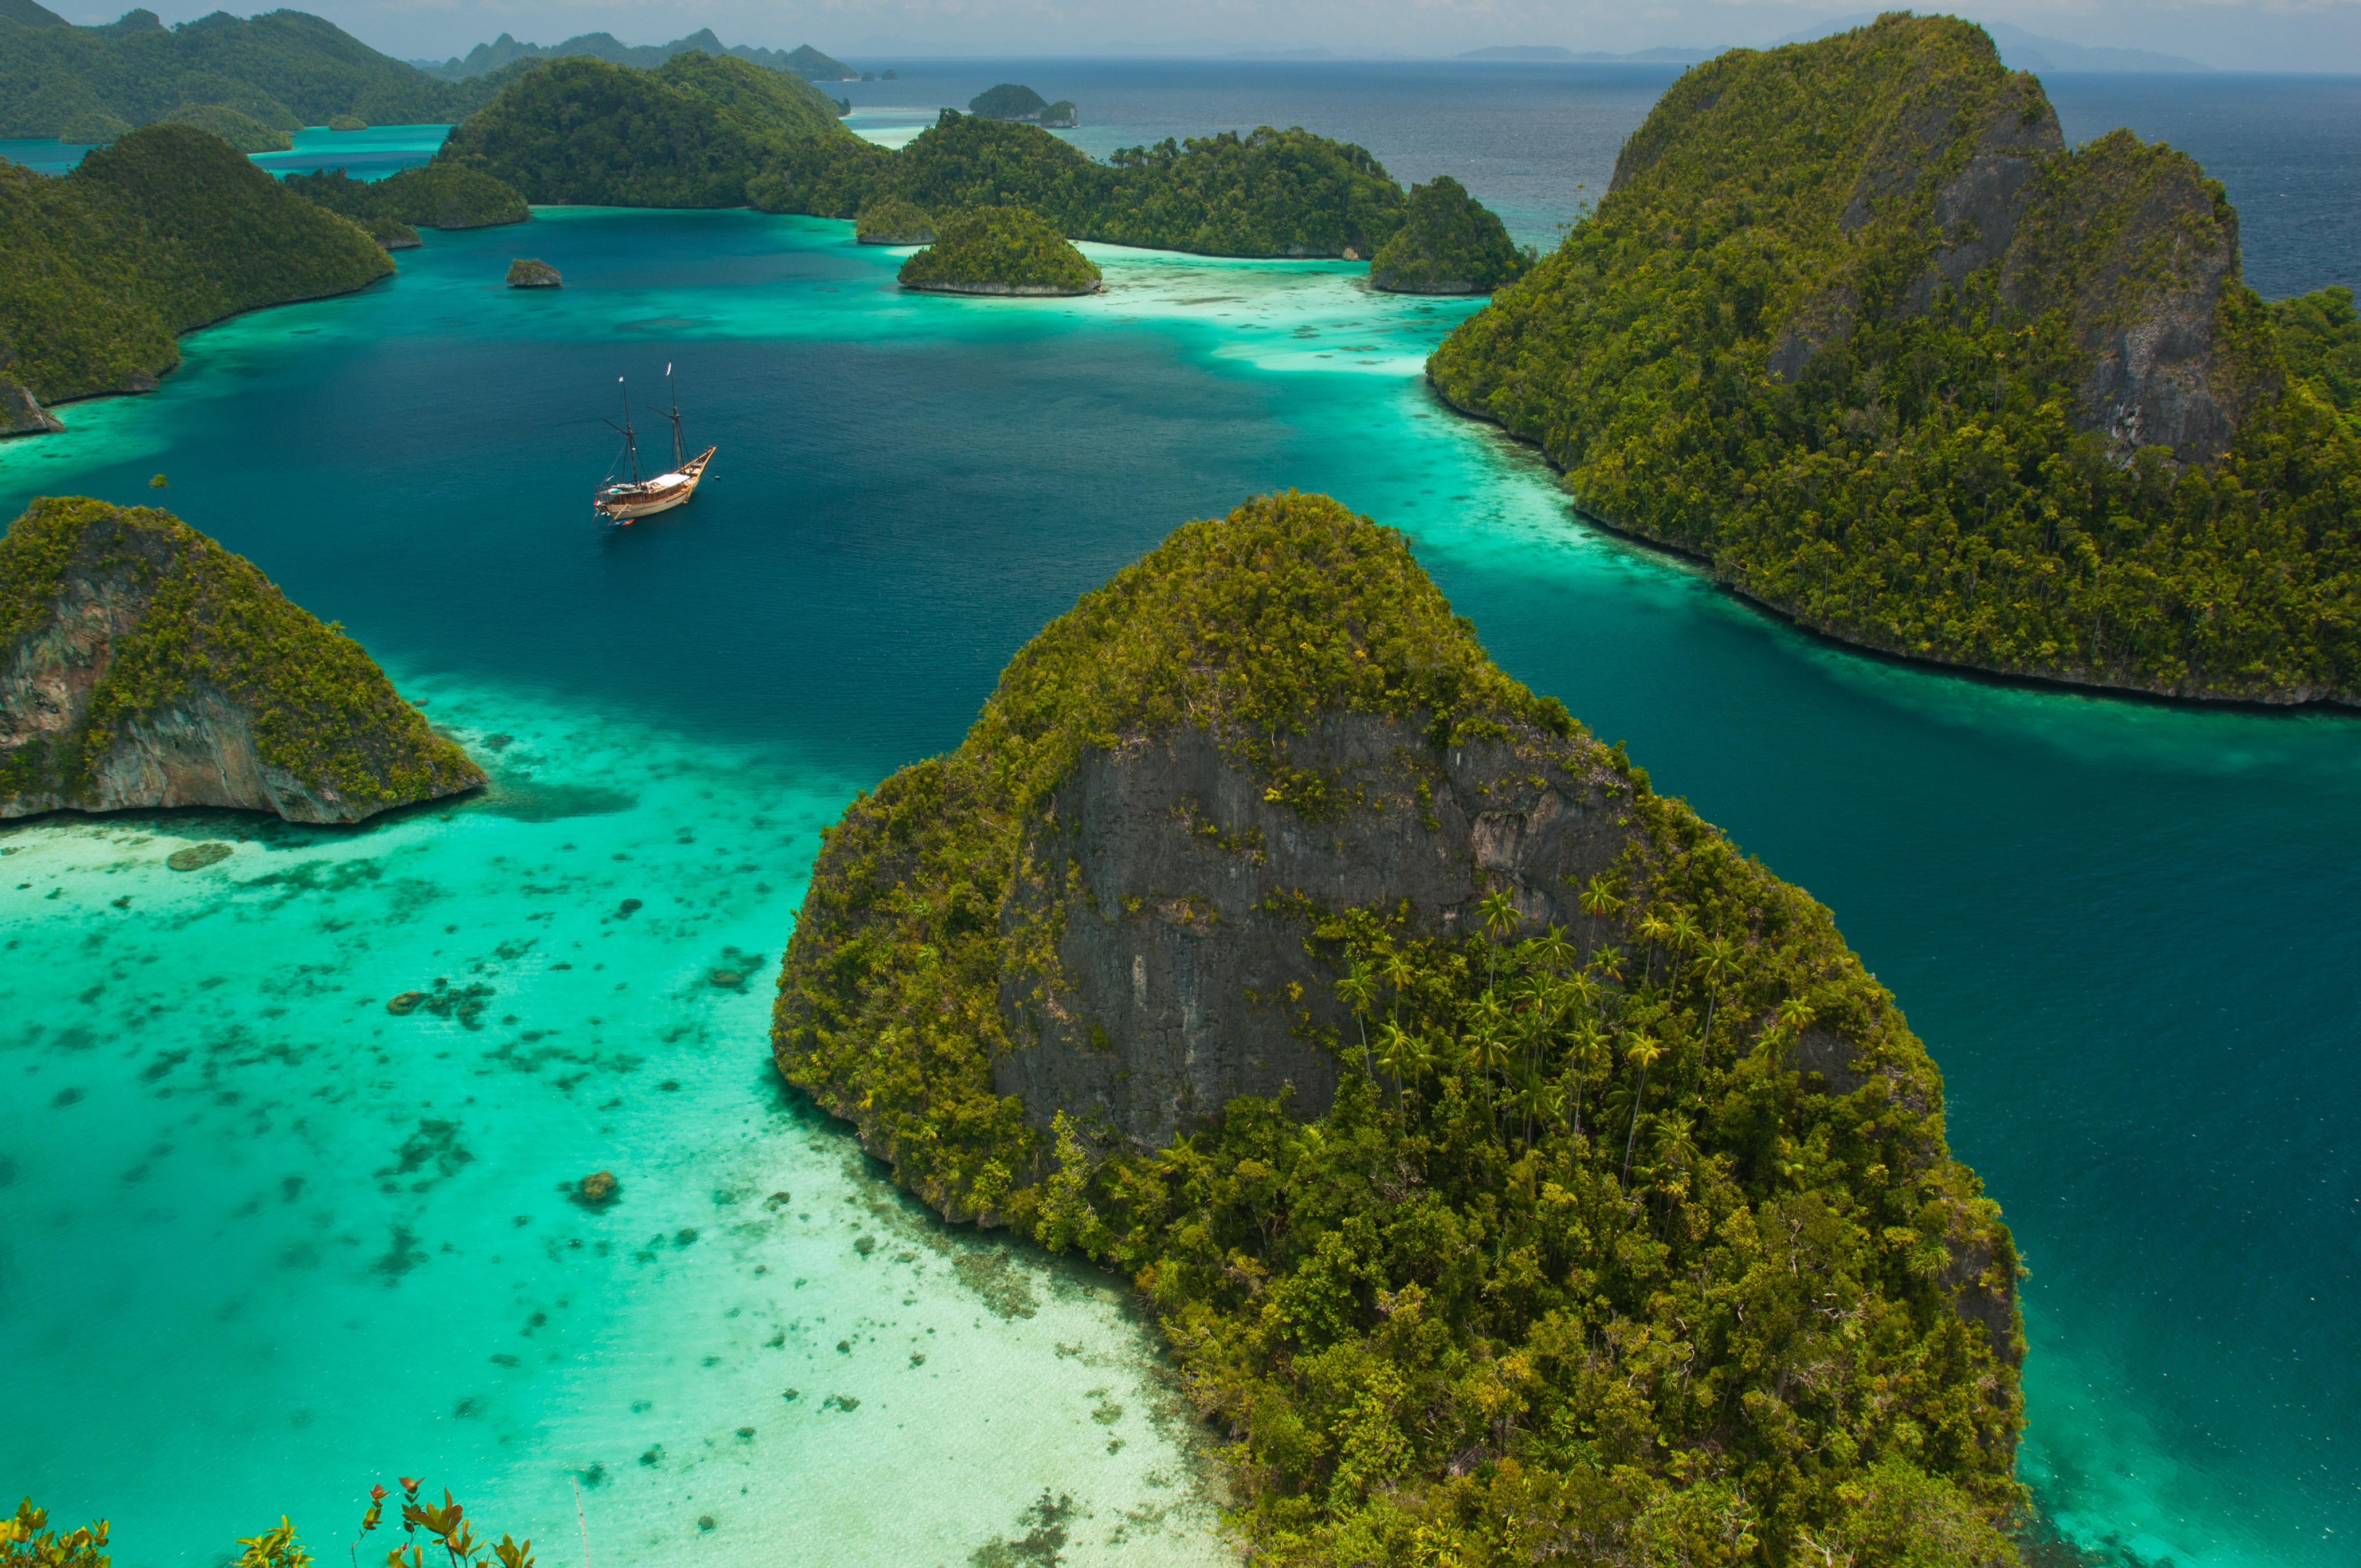 This Indonesian archipelago is a diver’s paradise